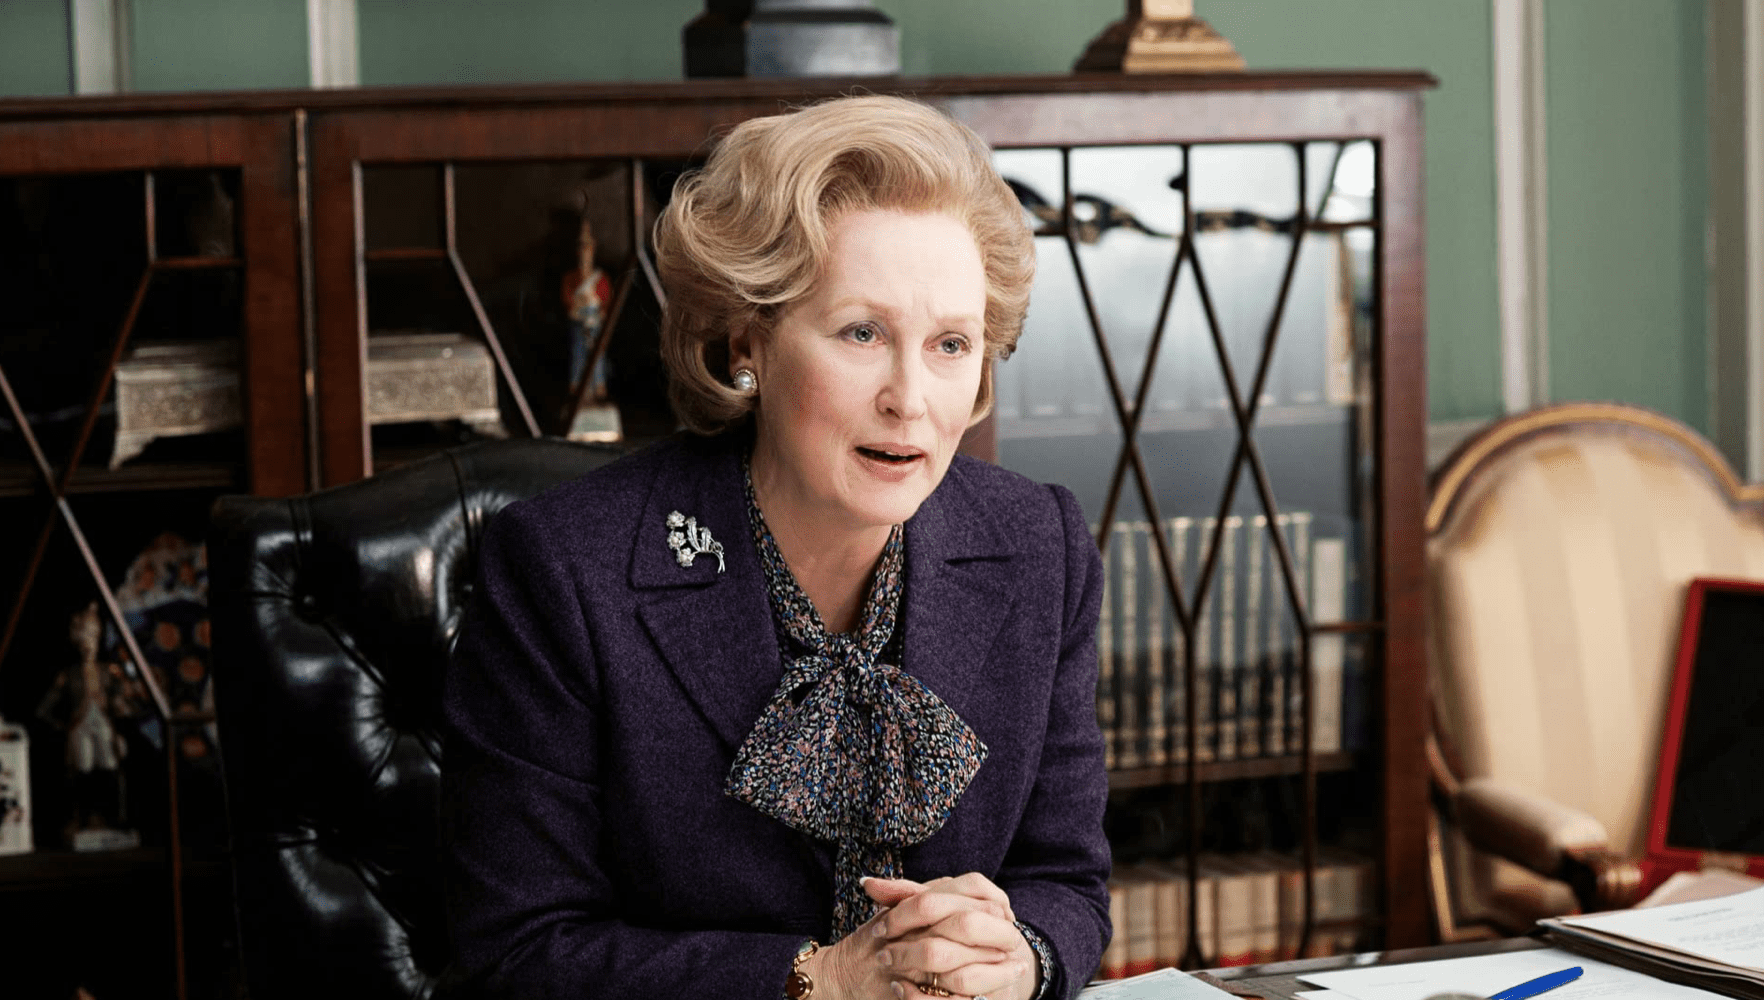 Meryl Streep as Margaret Thatcher in this scene from HBO Max